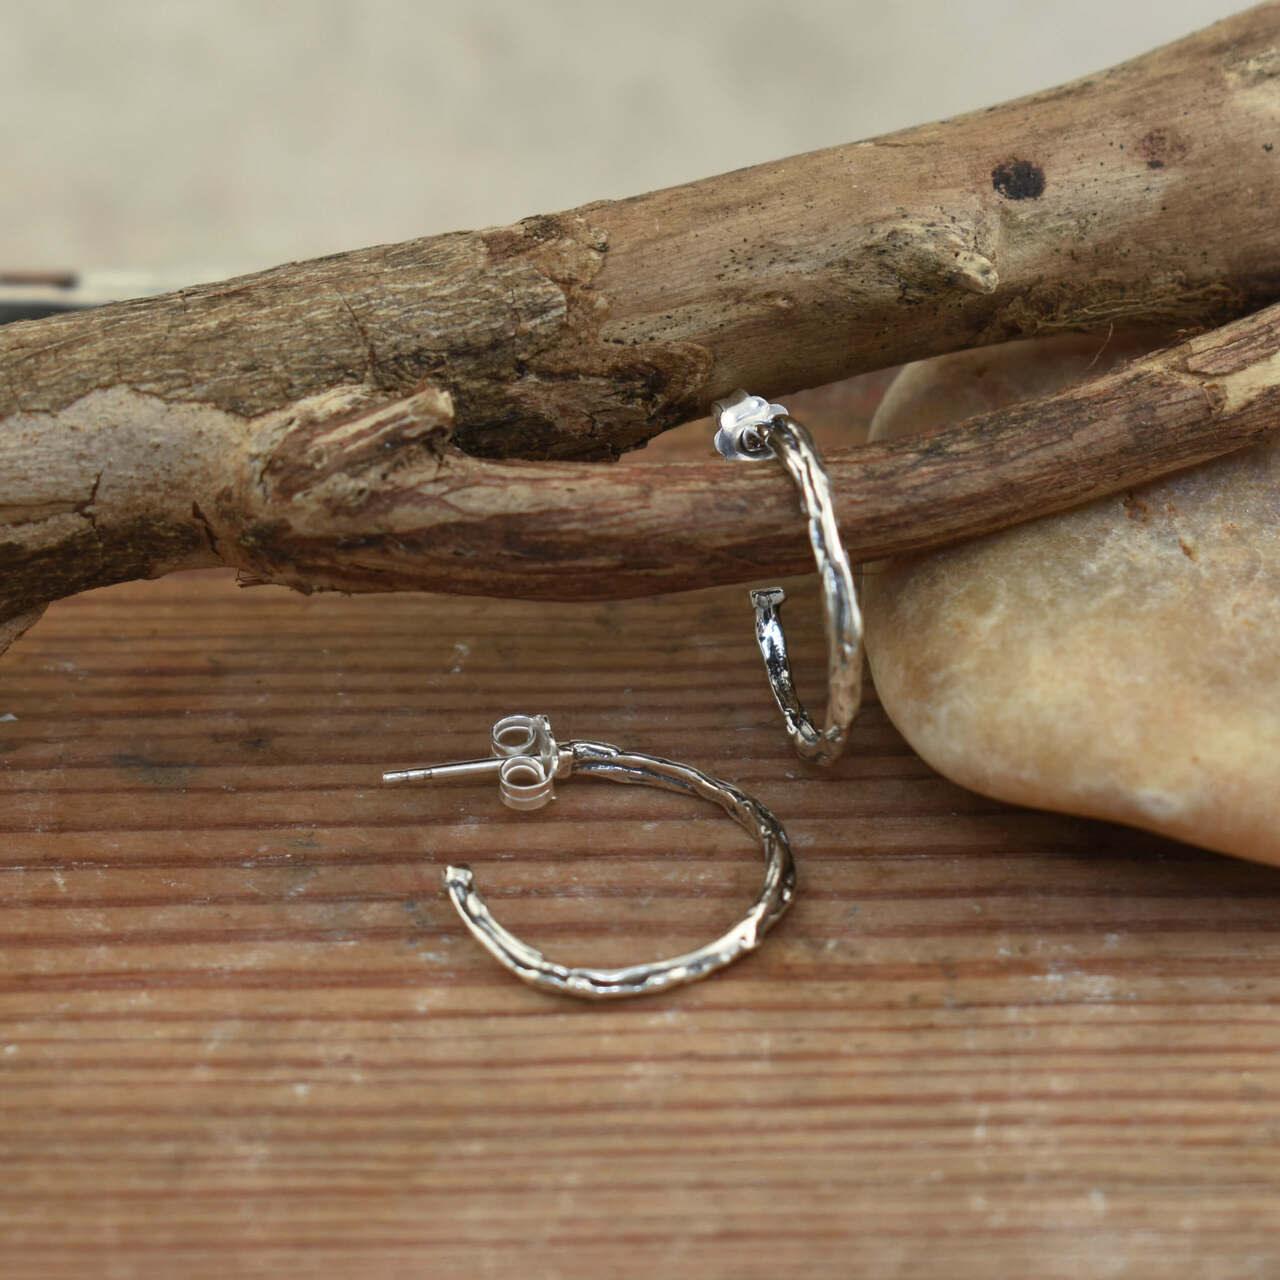 Handcrafted sterling silver rustic earrings in push back post style